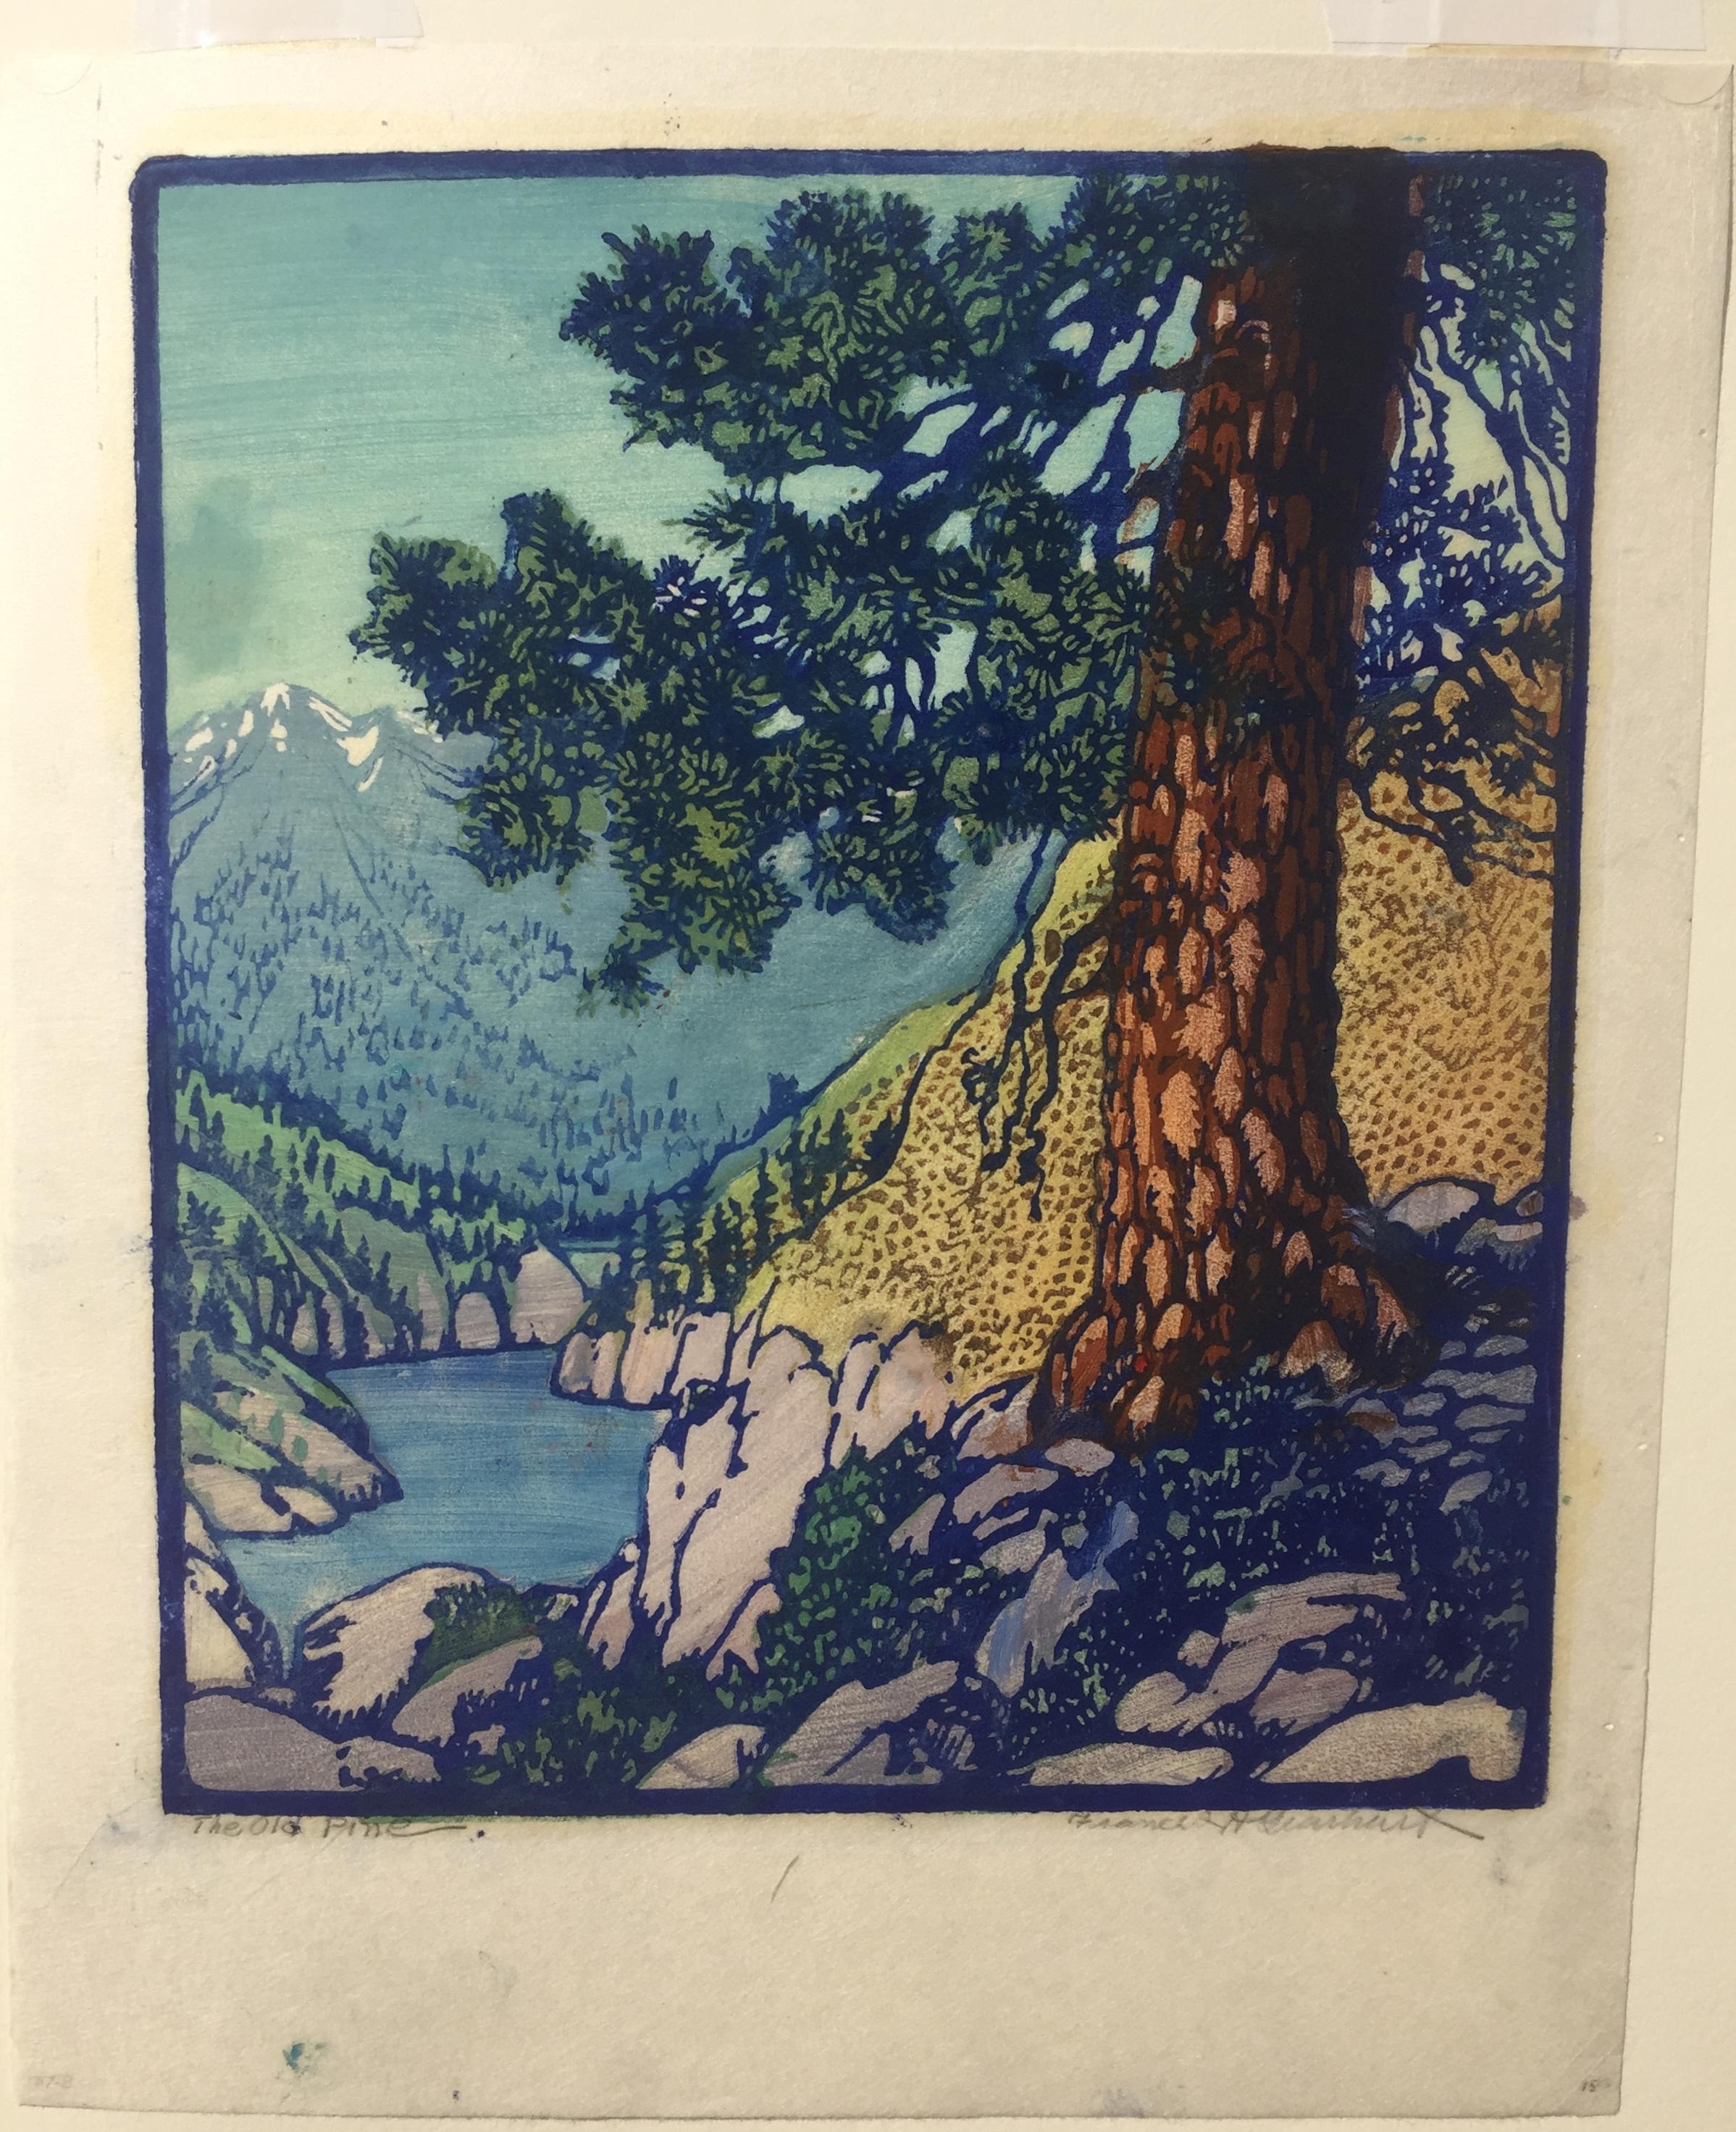 The Old Pine - Print by Frances H. Gearhart